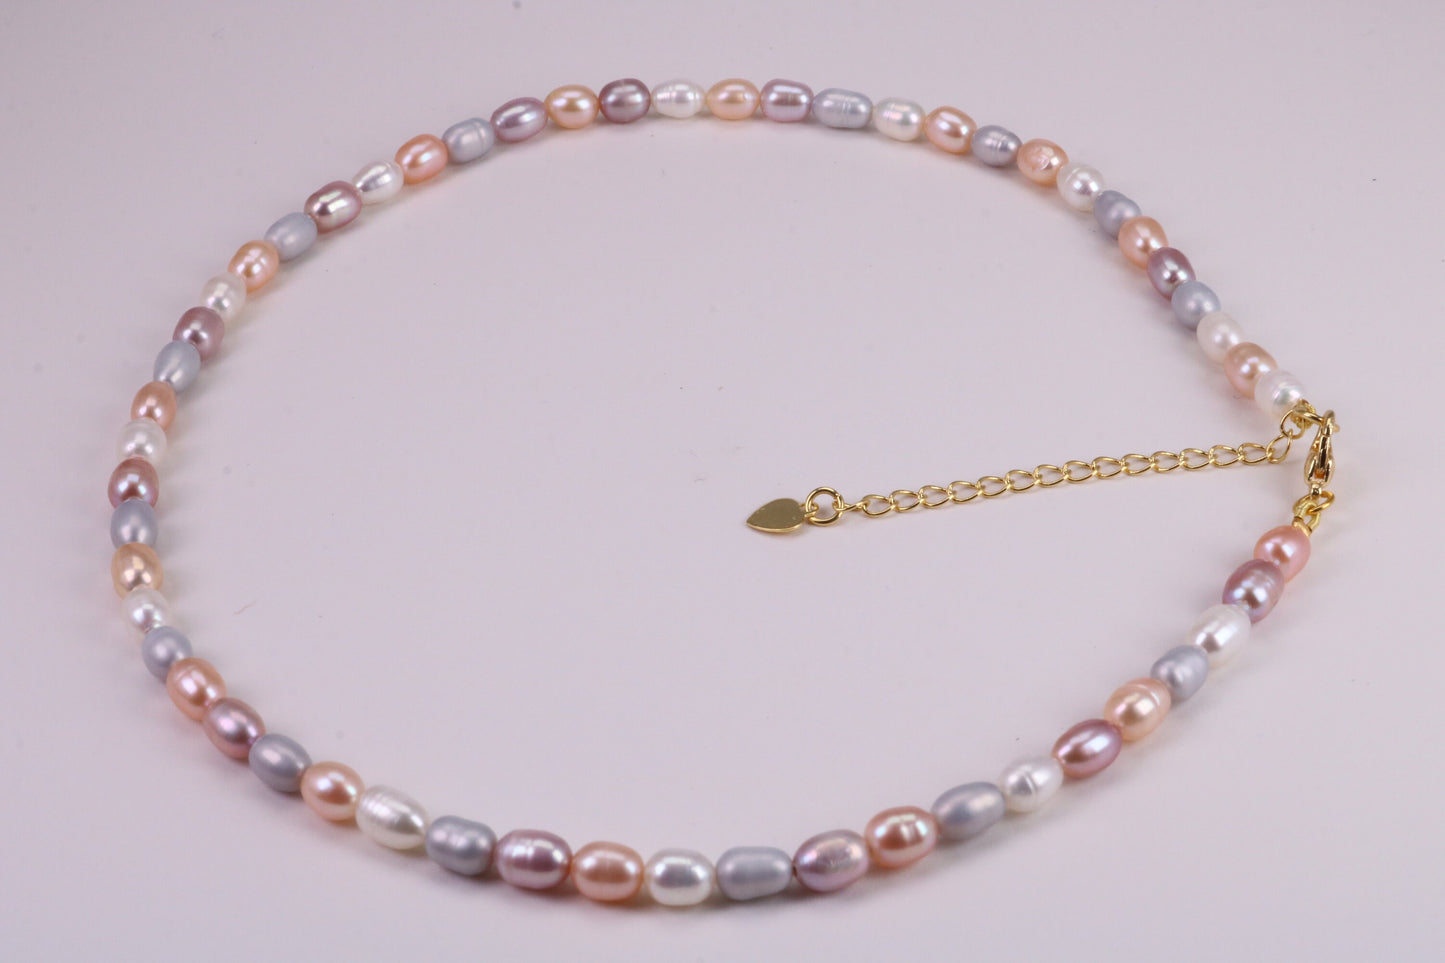 Natural Pastel Coloured 16 Inches Long Single Strand Pearl Necklace set in Silver, 5 mm Oval Pearls, Length Adjustable Necklace